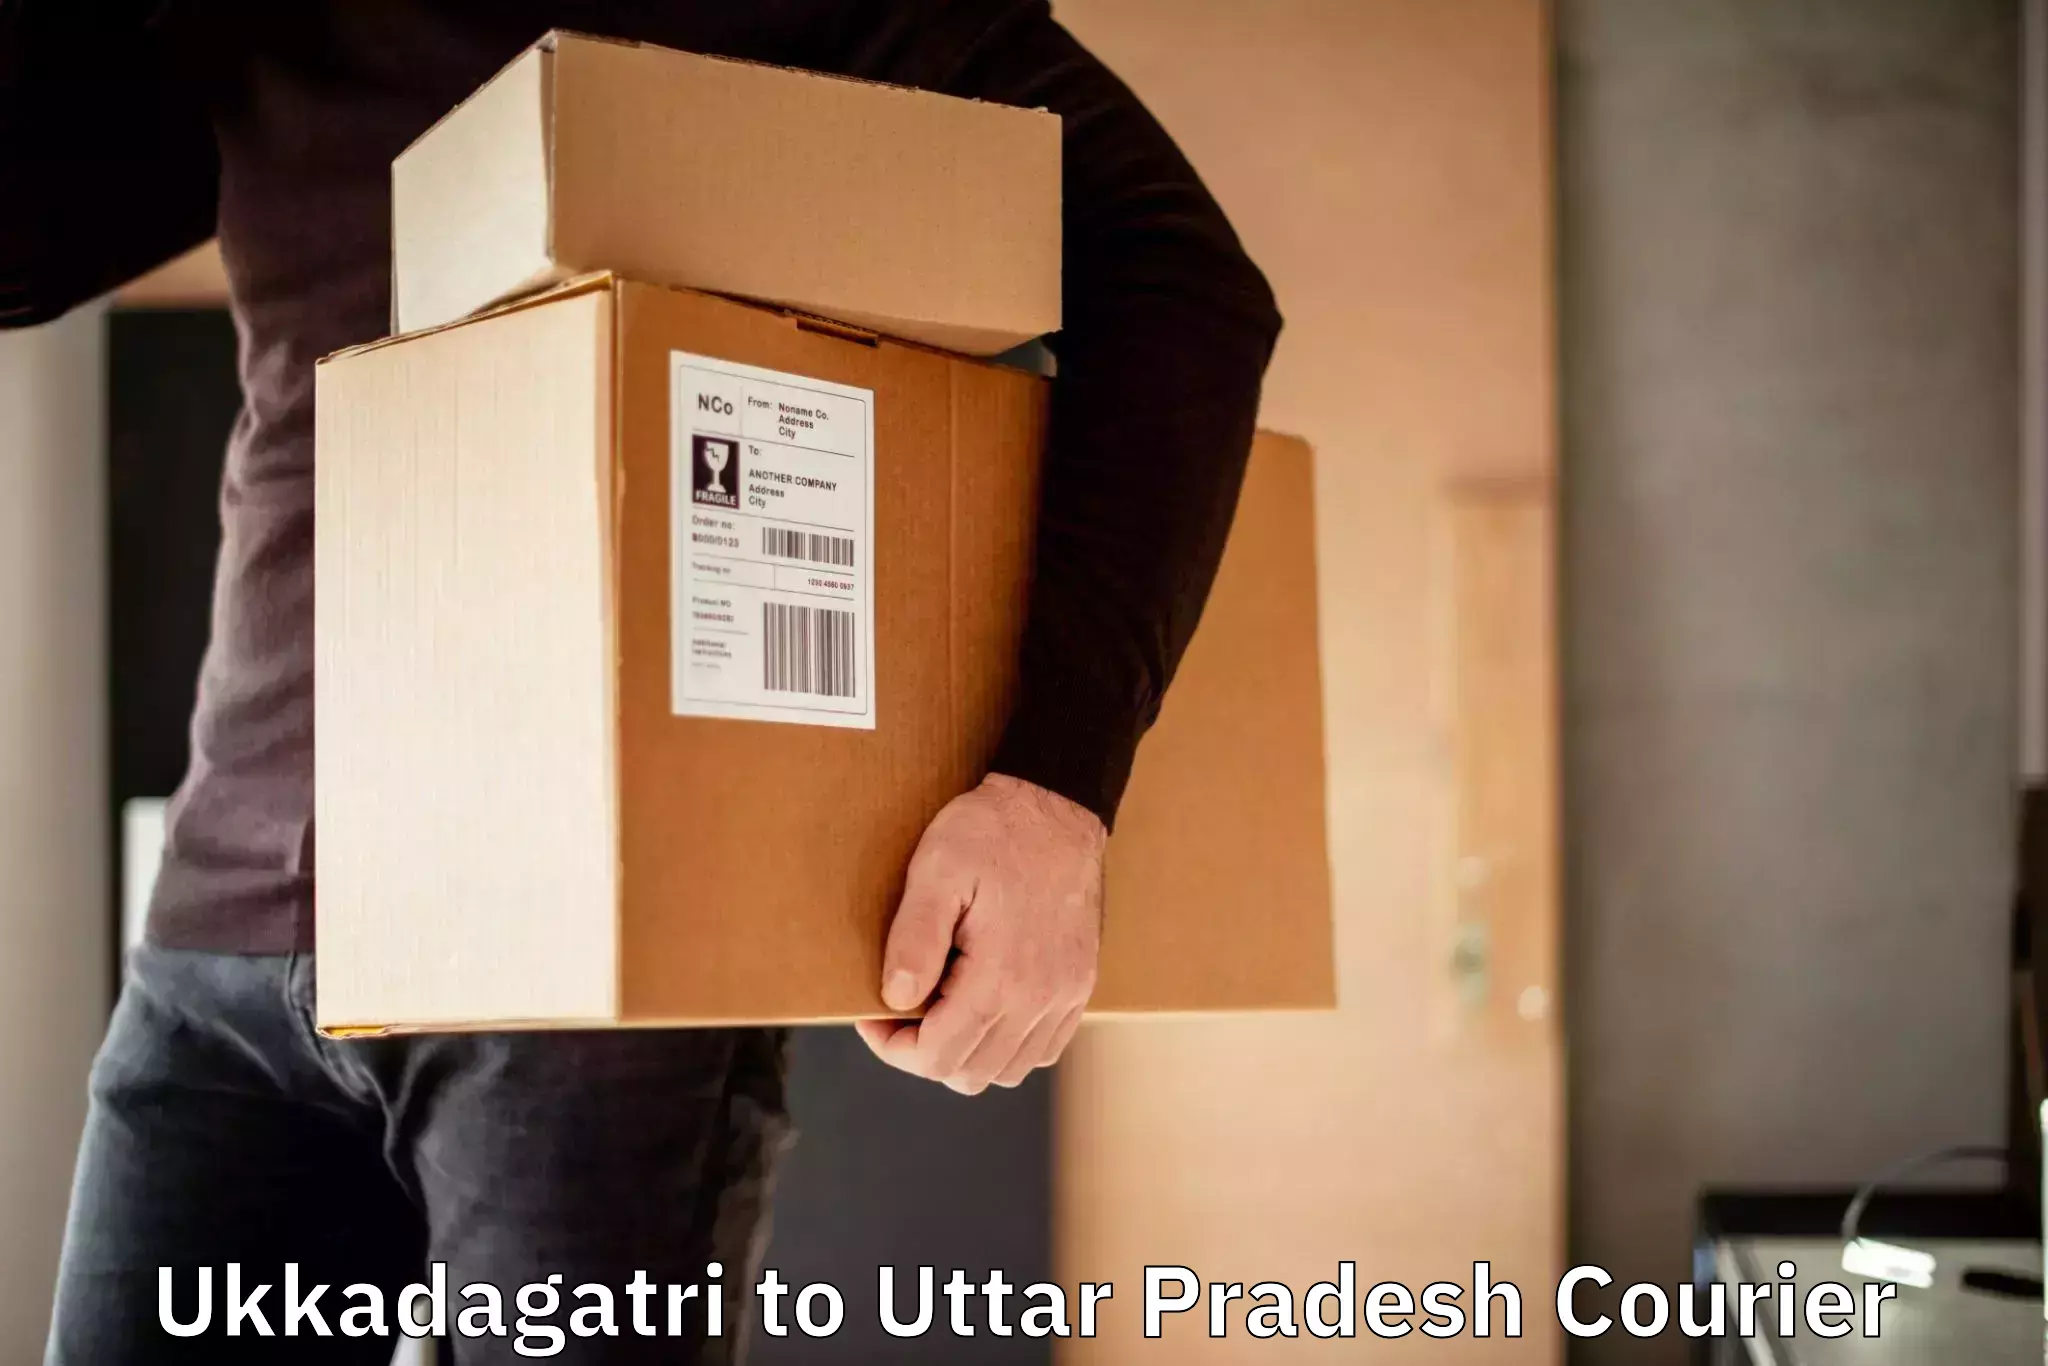 24-hour delivery options Ukkadagatri to IIT Kanpur